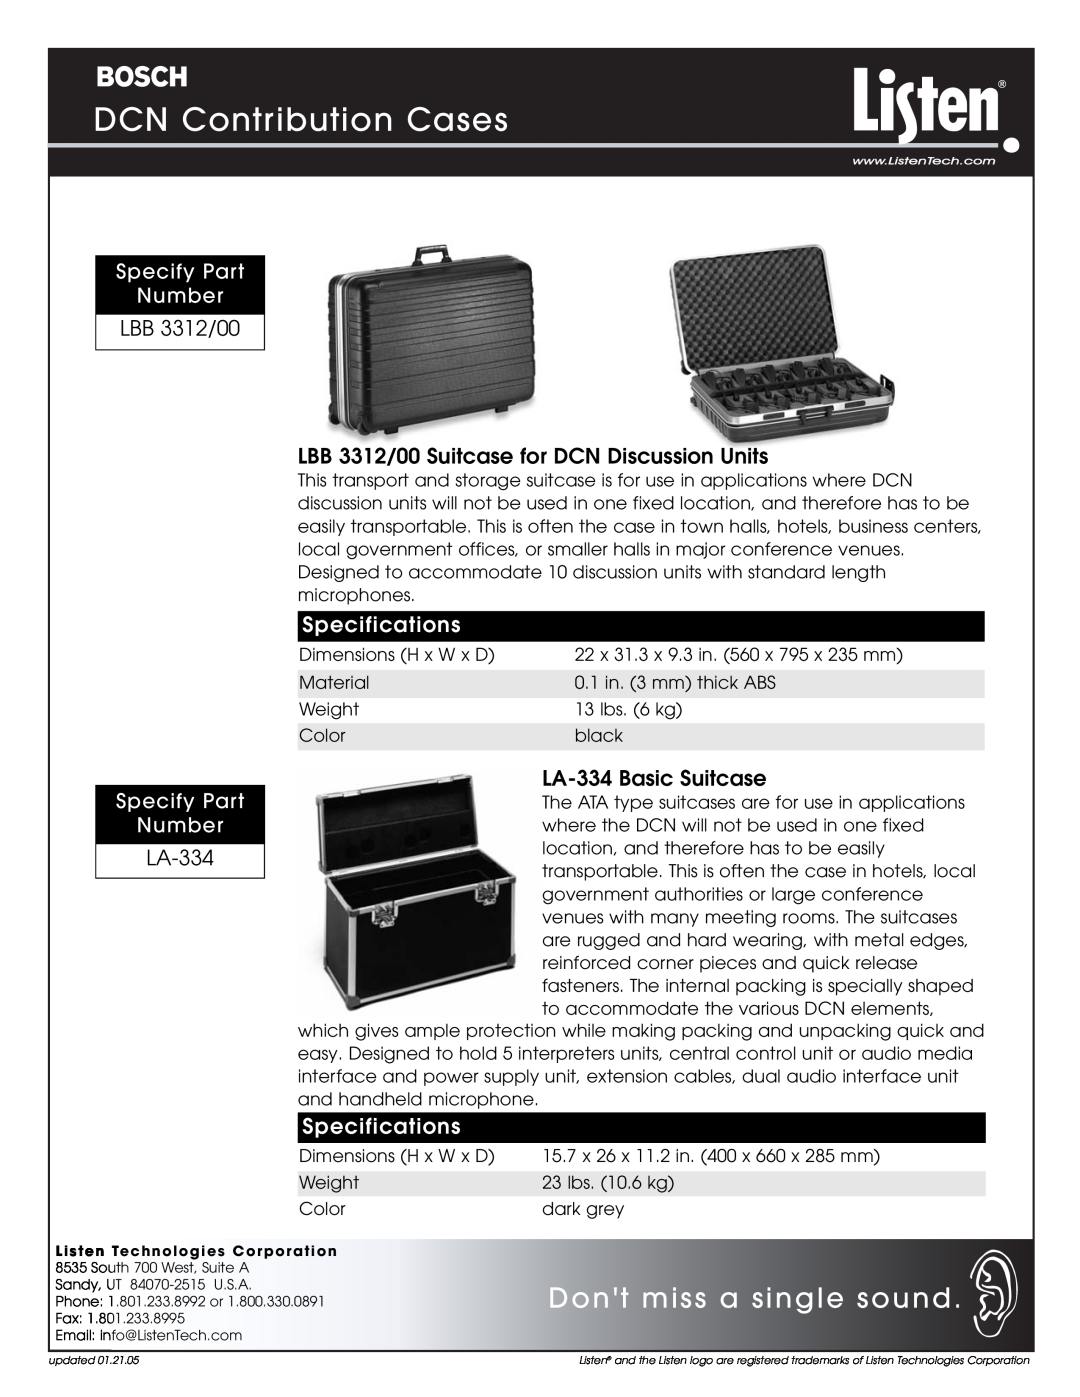 Listen Technologies LBB 3500 specifications LBB 3312/00 LBB 3312/00 Suitcase for DCN Discussion Units, Specifications 